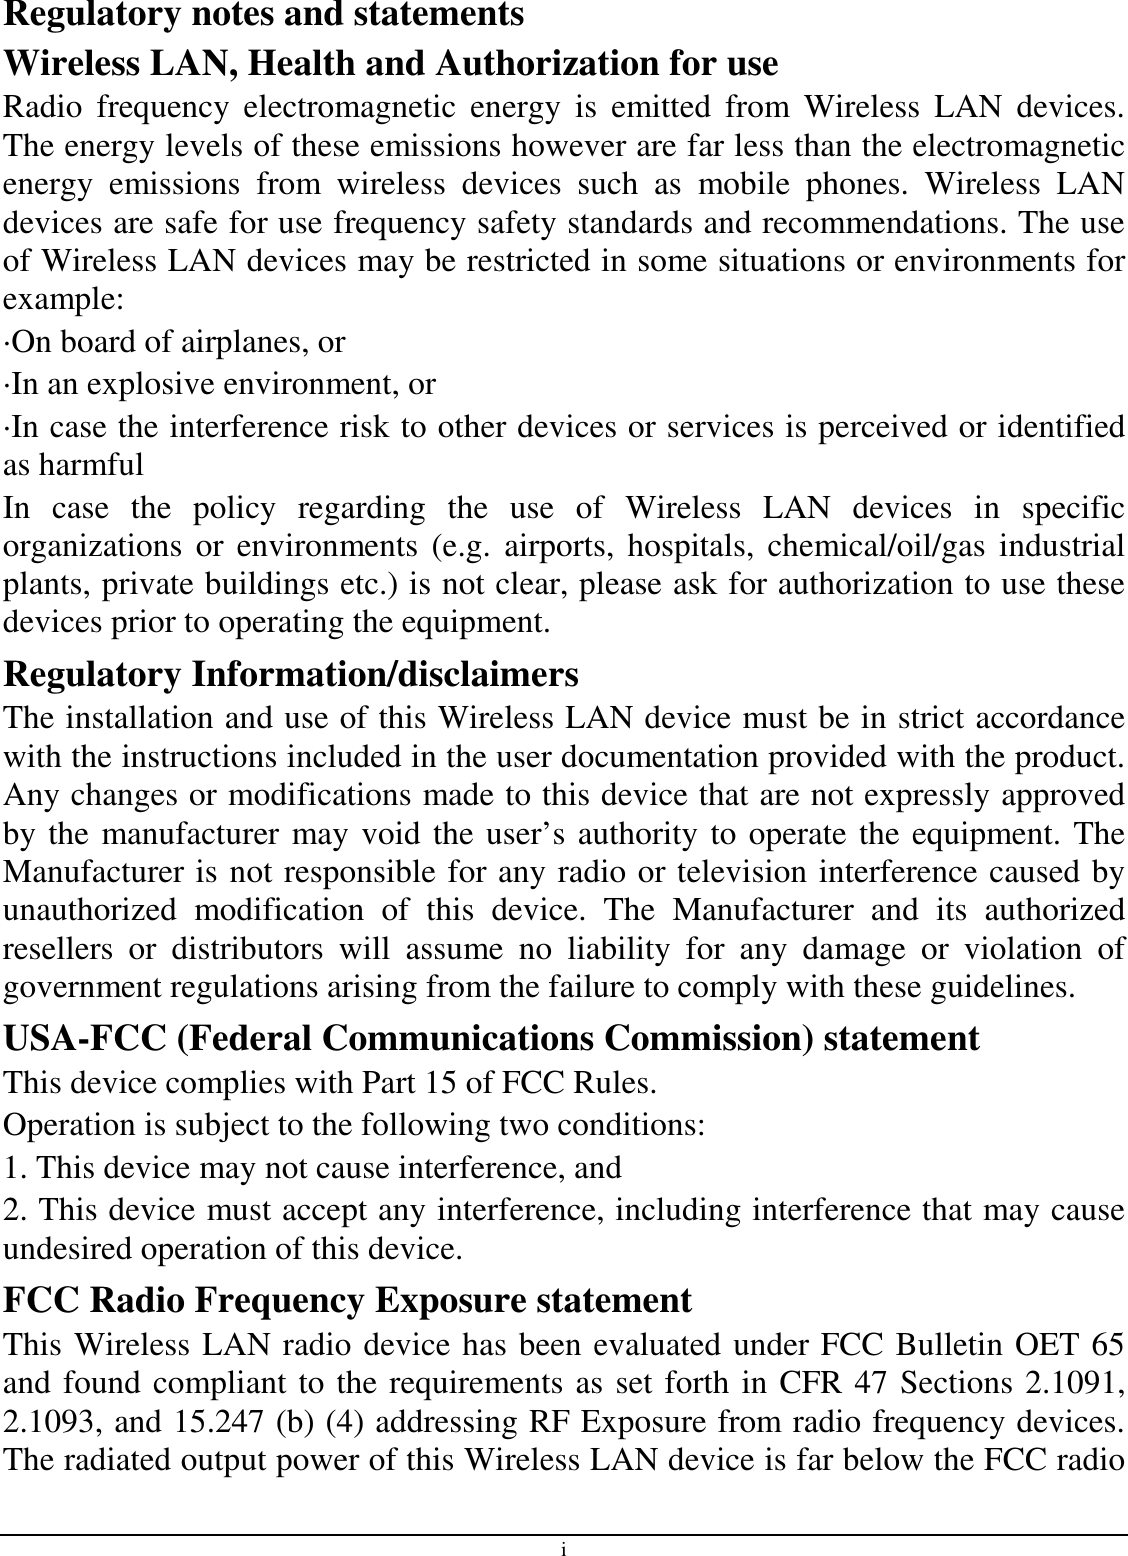 i Regulatory notes and statements Wireless LAN, Health and Authorization for use Radio  frequency  electromagnetic  energy  is  emitted  from  Wireless  LAN  devices. The energy levels of these emissions however are far less than the electromagnetic energy  emissions  from  wireless  devices  such  as  mobile  phones.  Wireless  LAN devices are safe for use frequency safety standards and recommendations. The use of Wireless LAN devices may be restricted in some situations or environments for example: ·On board of airplanes, or ·In an explosive environment, or ·In case the interference risk to other devices or services is perceived or identified as harmful In  case  the  policy  regarding  the  use  of  Wireless  LAN  devices  in  specific organizations  or  environments (e.g.  airports,  hospitals, chemical/oil/gas  industrial plants, private buildings etc.) is not clear, please ask for authorization to use these devices prior to operating the equipment. Regulatory Information/disclaimers The installation and use of this Wireless LAN device must be in strict accordance with the instructions included in the user documentation provided with the product. Any changes or modifications made to this device that are not expressly approved by the manufacturer may void the user’s authority to operate the equipment. The Manufacturer is not responsible for any radio or television interference caused by unauthorized  modification  of  this  device.  The  Manufacturer  and  its  authorized resellers  or  distributors  will  assume  no  liability  for  any  damage  or  violation  of government regulations arising from the failure to comply with these guidelines. USA-FCC (Federal Communications Commission) statement This device complies with Part 15 of FCC Rules. Operation is subject to the following two conditions: 1. This device may not cause interference, and 2. This device must accept any interference, including interference that may cause undesired operation of this device. FCC Radio Frequency Exposure statement This Wireless LAN radio device has been evaluated under FCC Bulletin OET 65 and found compliant to the requirements as set forth in CFR 47 Sections 2.1091, 2.1093, and 15.247 (b) (4) addressing RF Exposure from radio frequency devices. The radiated output power of this Wireless LAN device is far below the FCC radio 